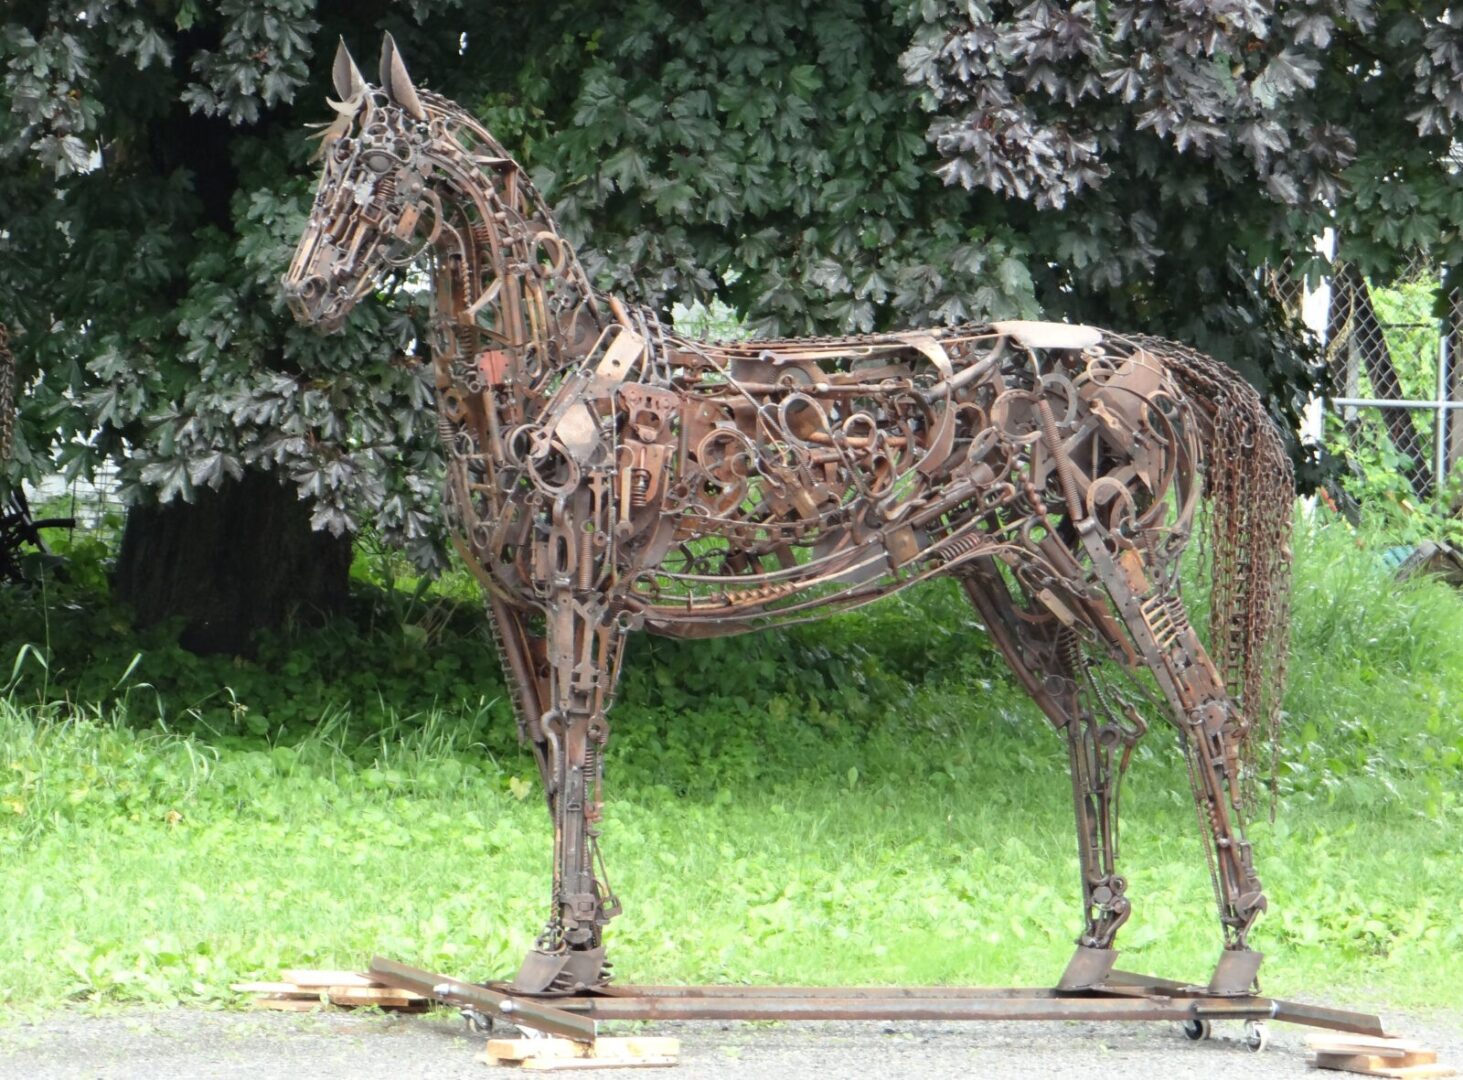 A horse made of metal is standing in a grassy area.